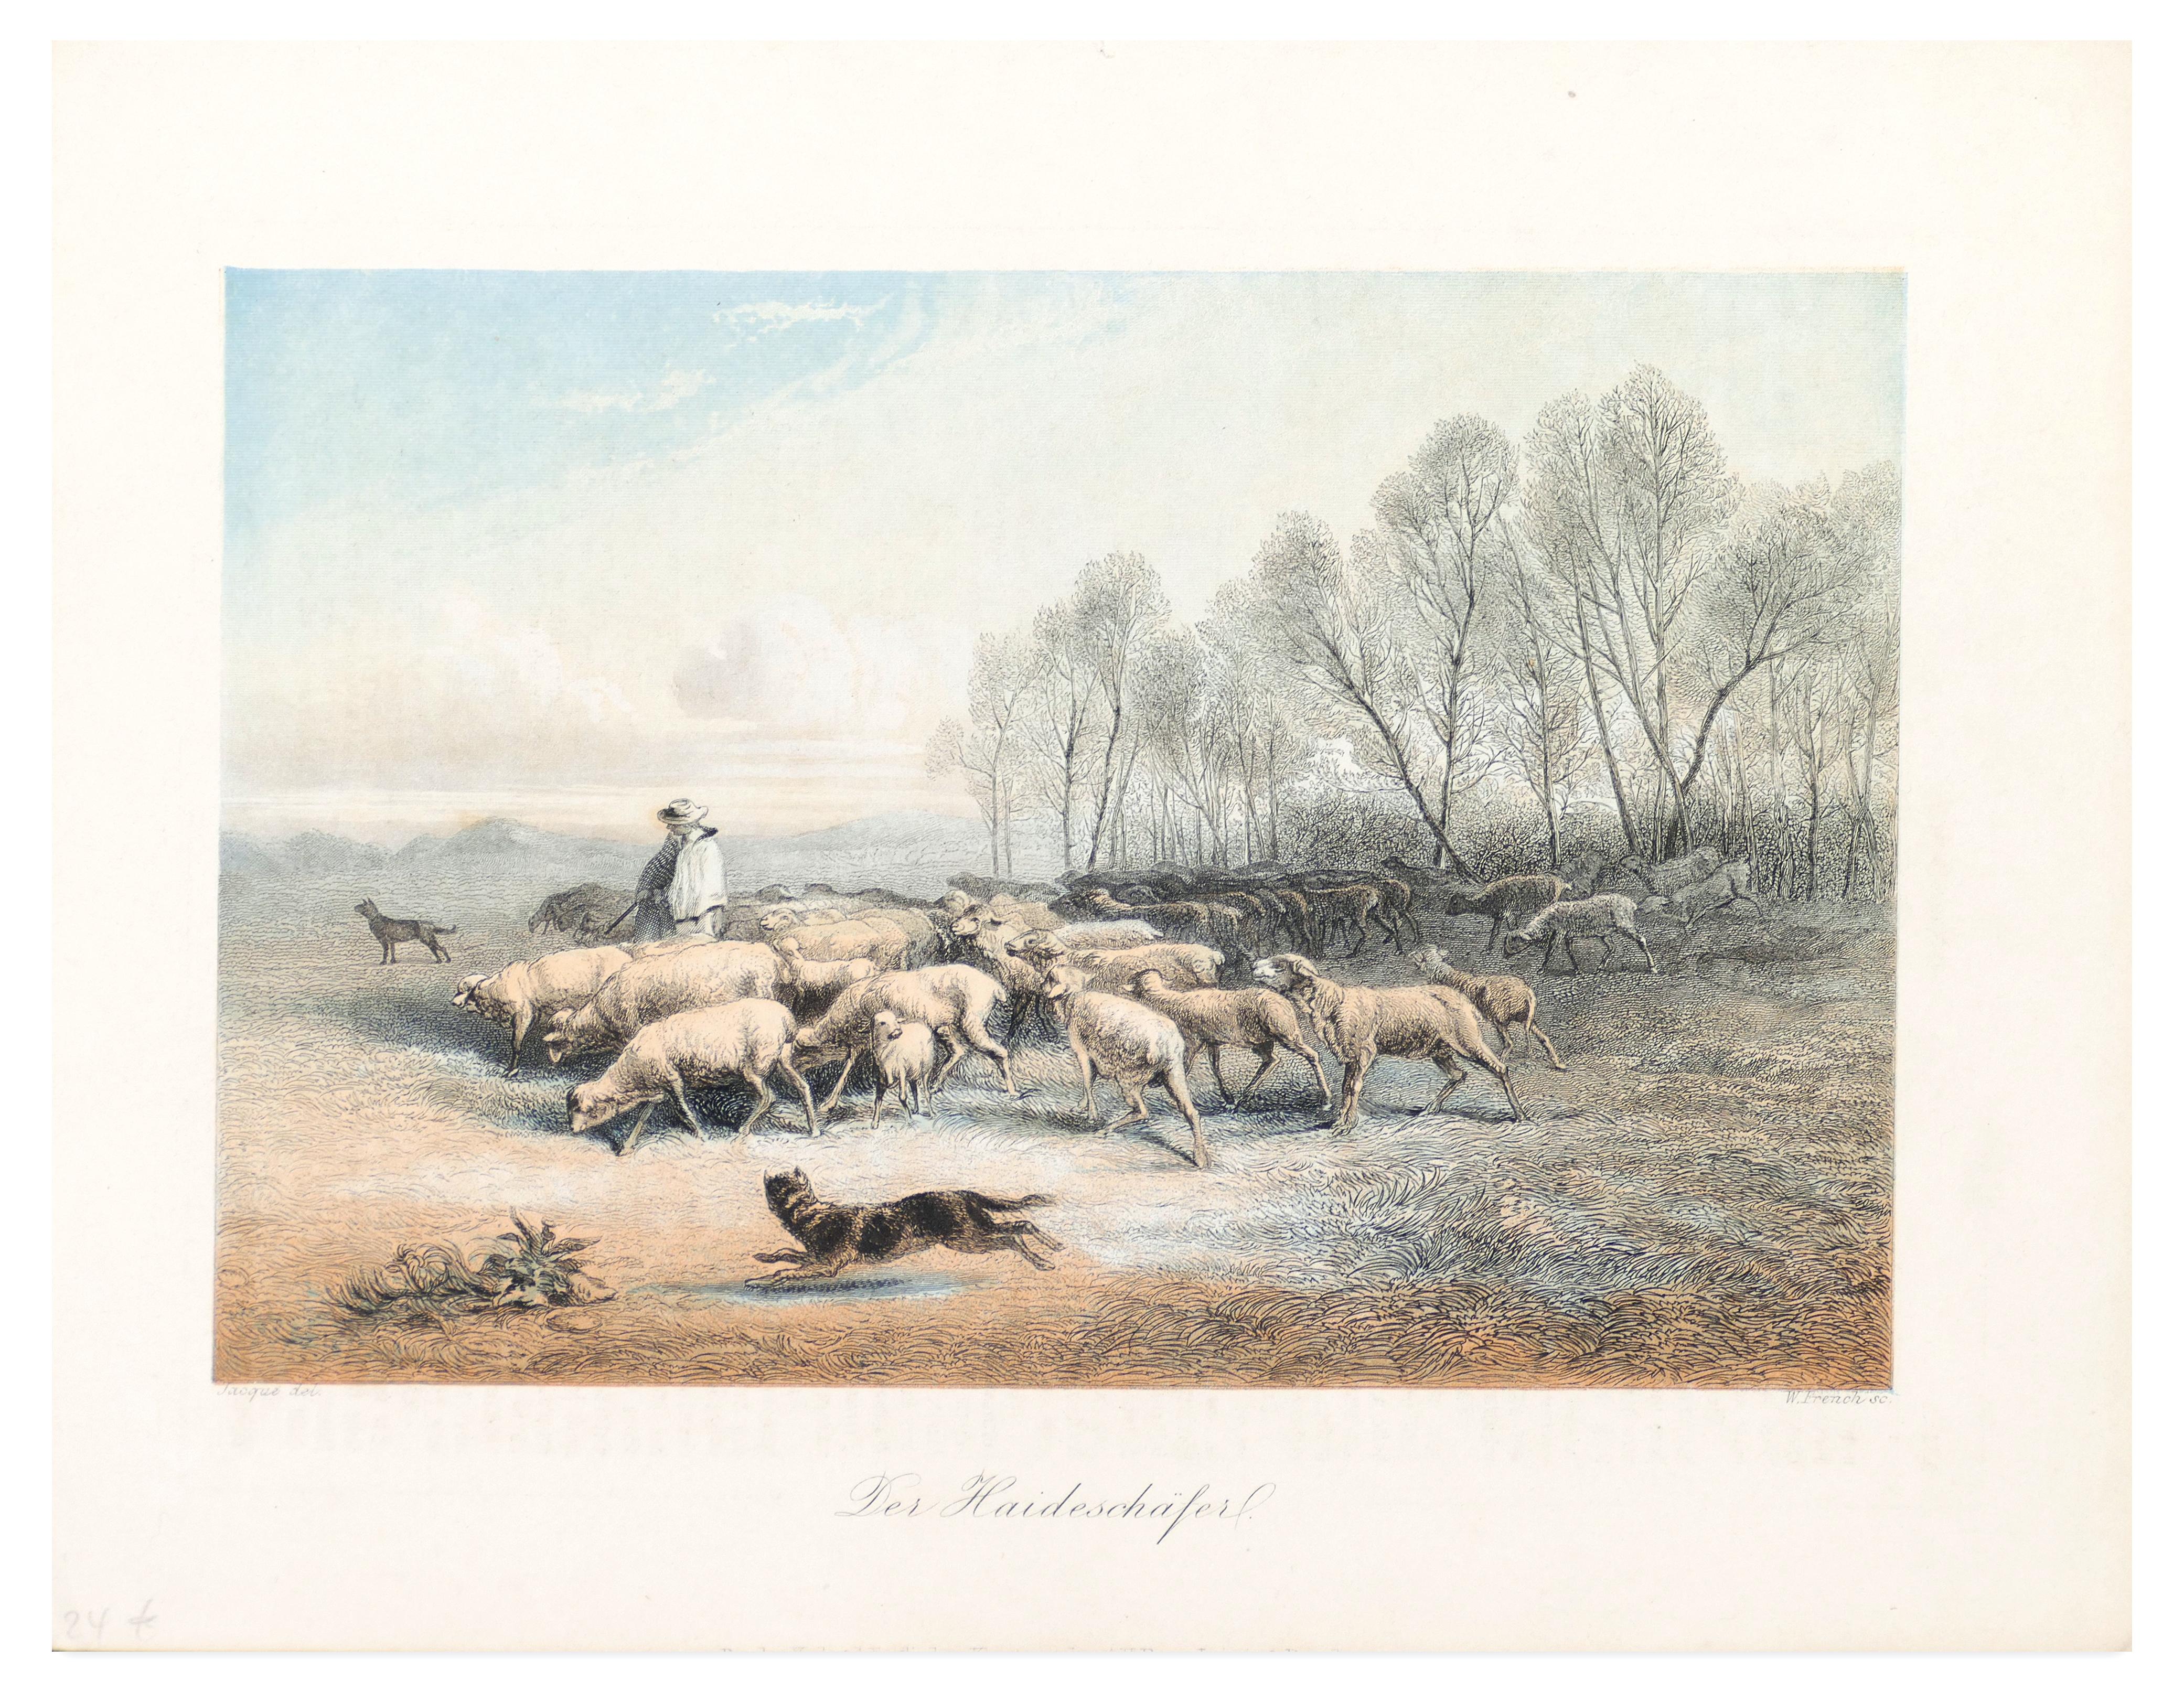 Unknown Figurative Print - A Shepherd with his Sheeps - Original Lithograph - Late 19th Century